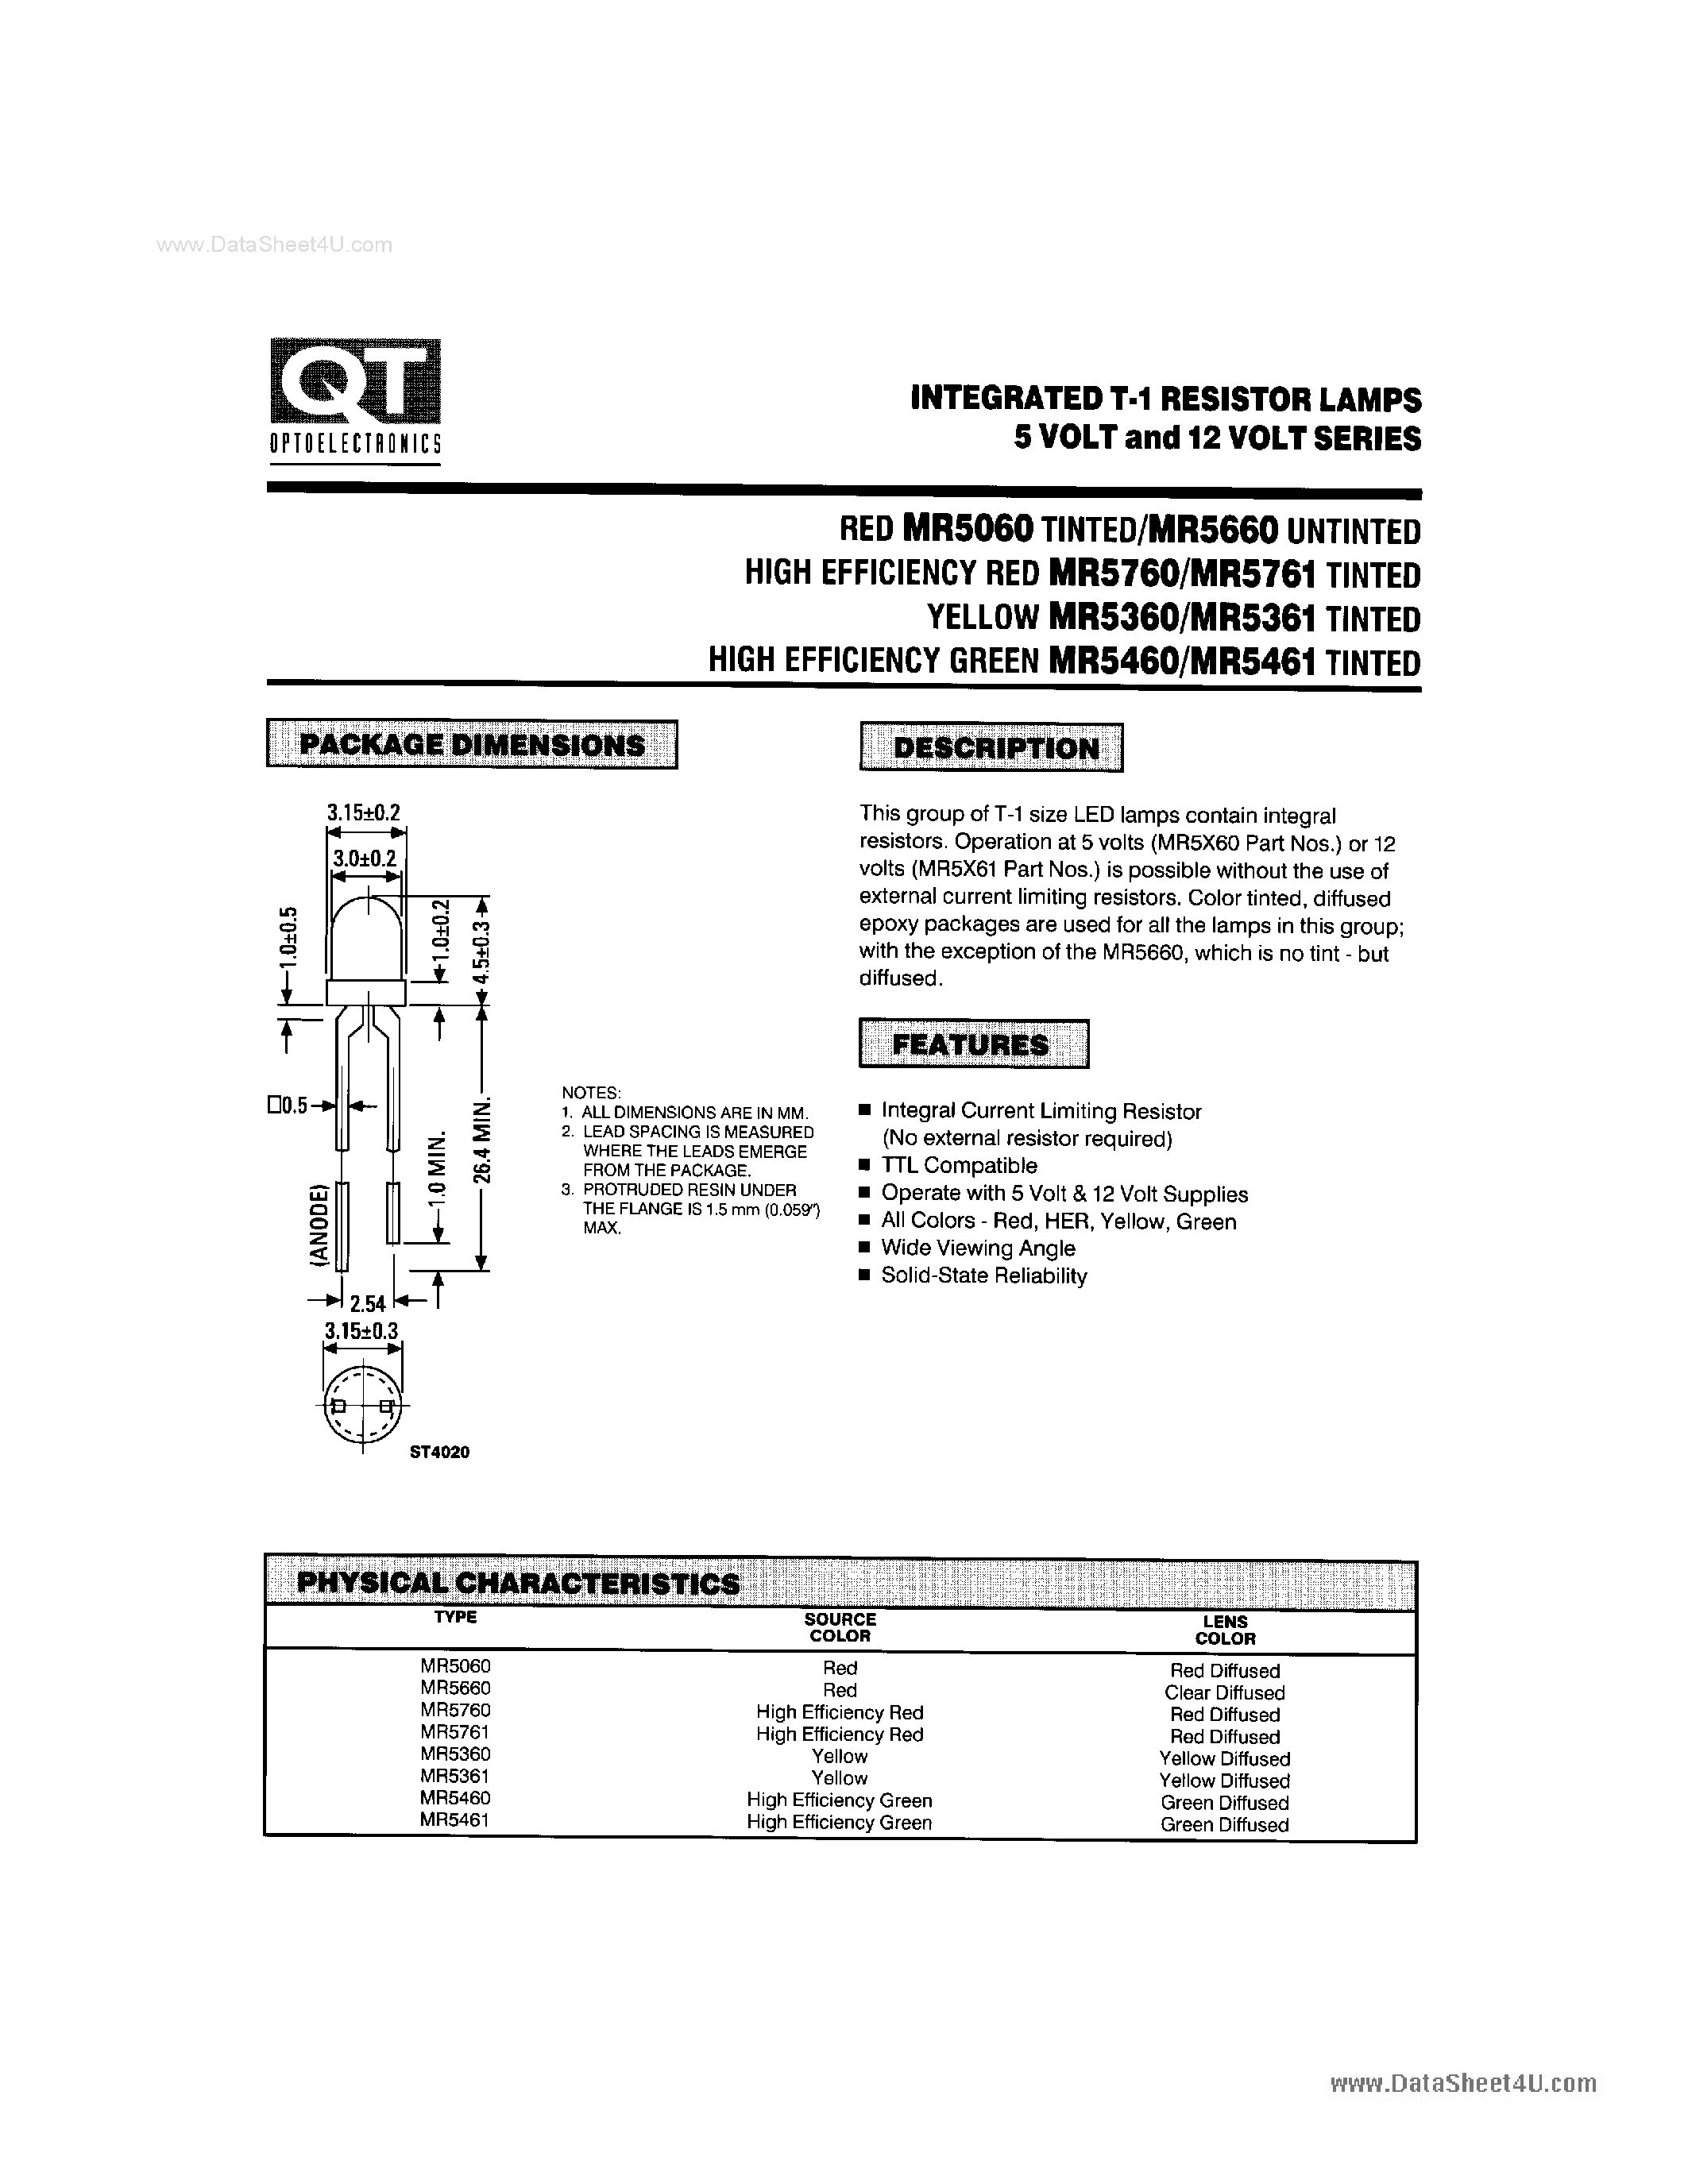 Datasheet MR5361 - (MR5xxx) INTEGRATED T-1 RESISTOR LAMPS 5 VOLT AND 12 VOLT SERIES page 1